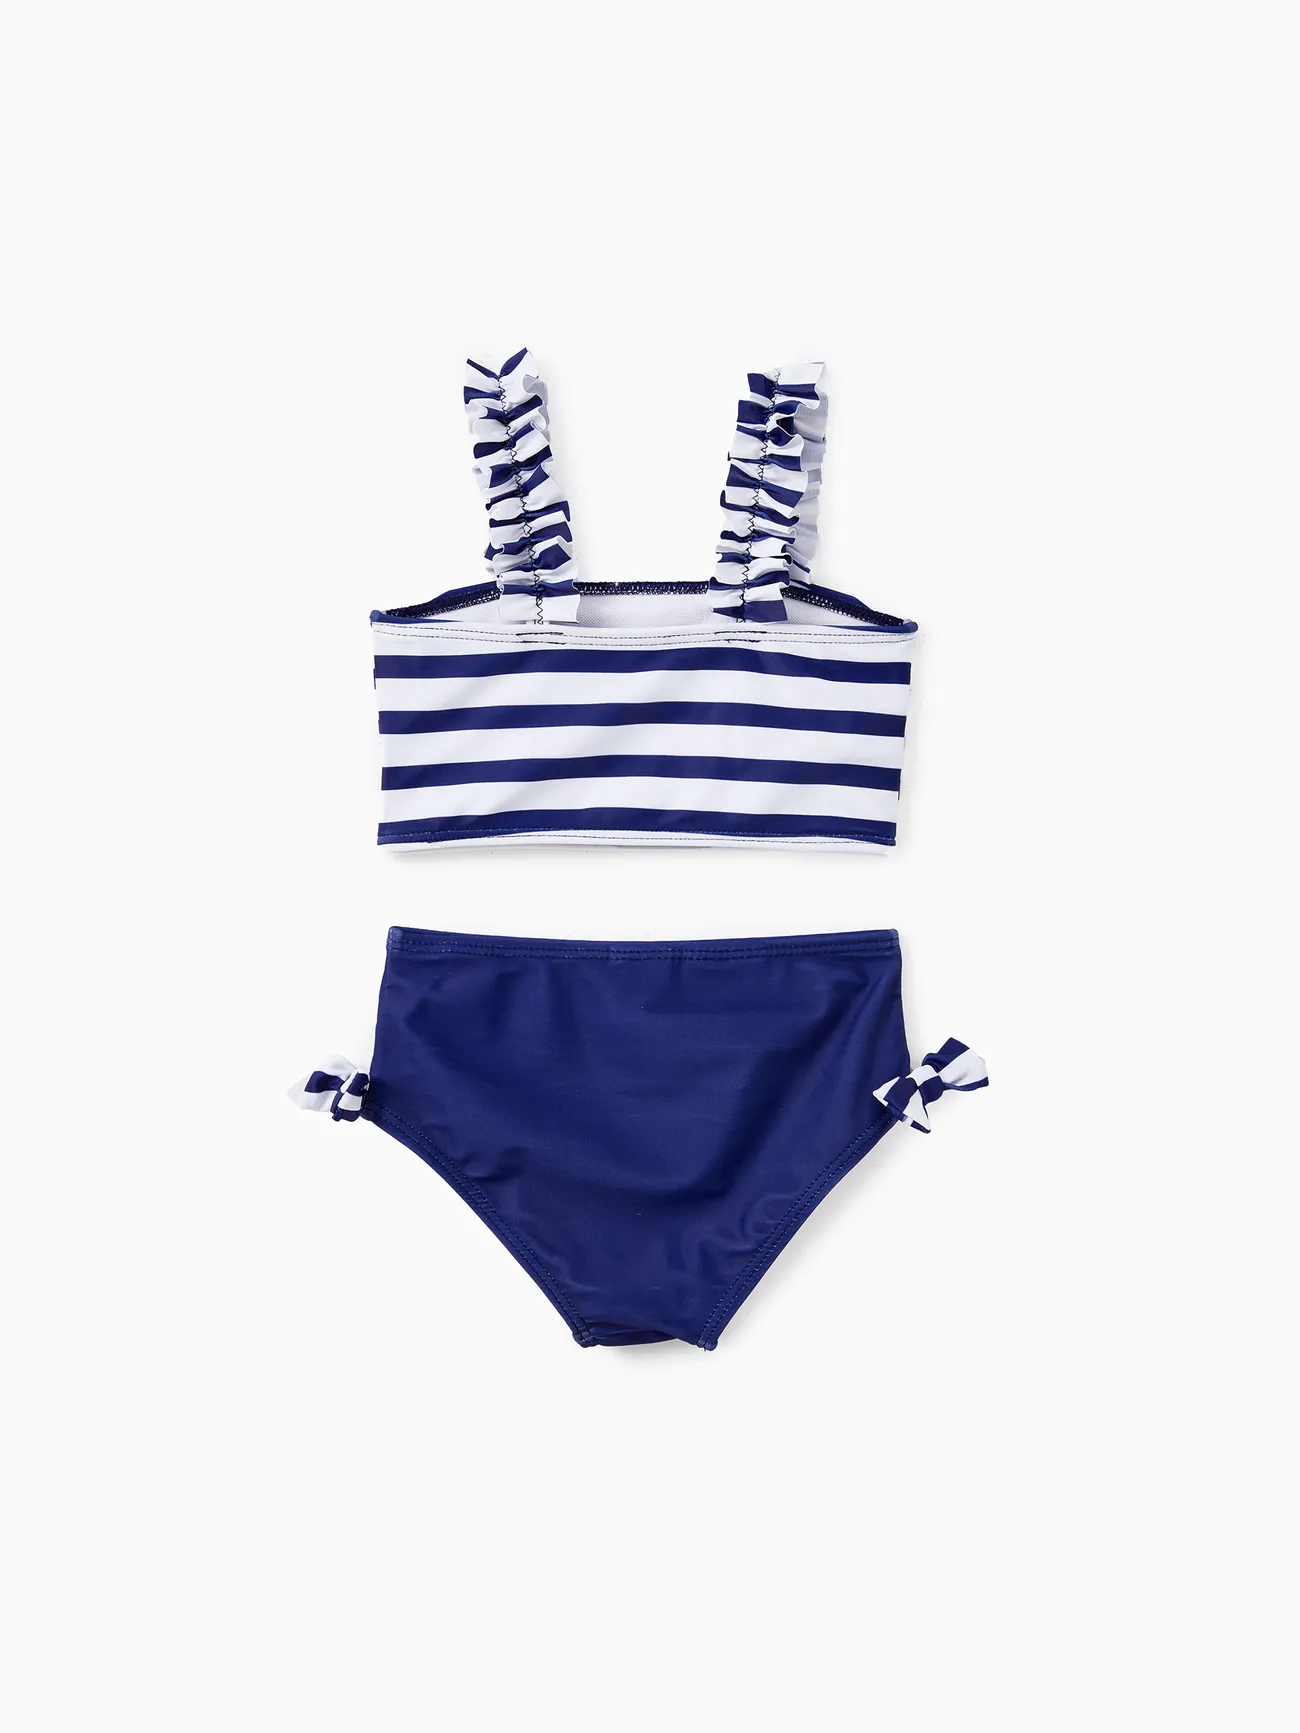 Disney Mickey and Friends Sibling Set Boys/Girls Character Stripped Swimsuit
 Dark Blue big image 1